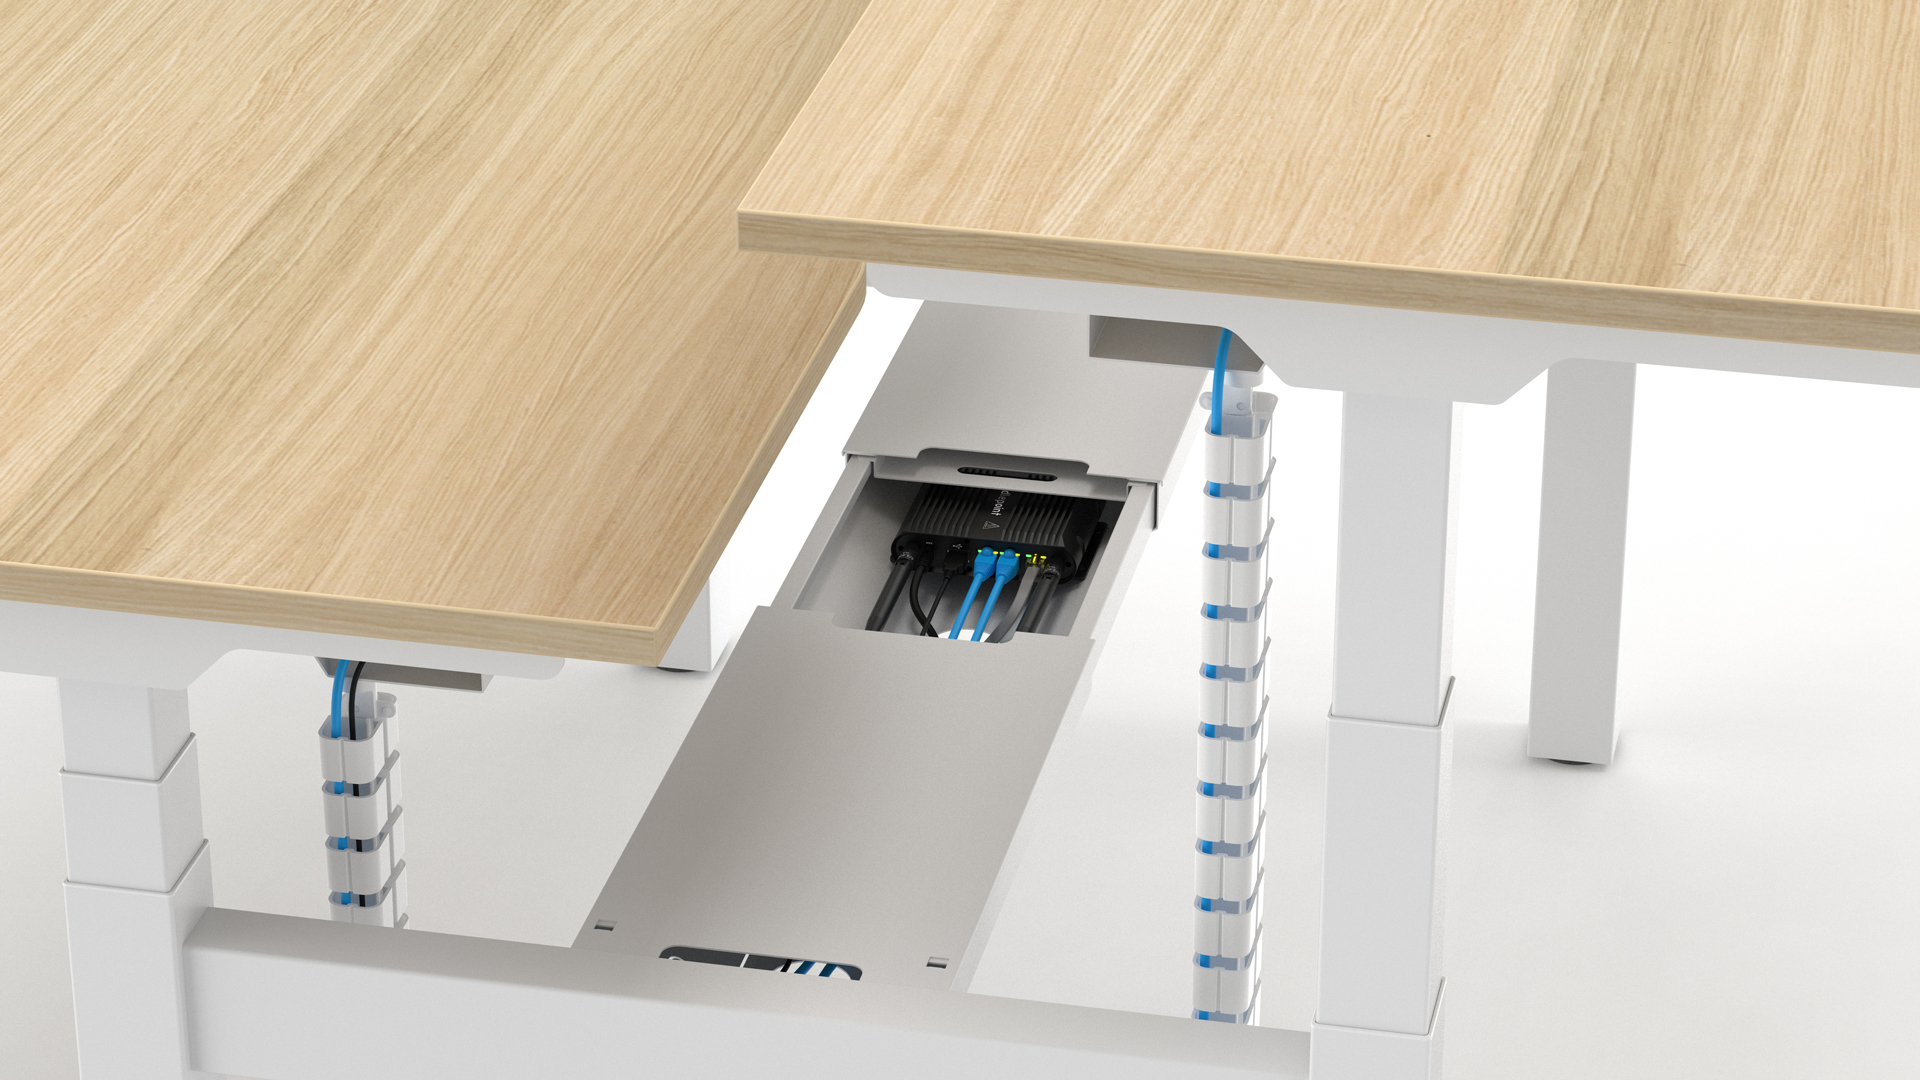 Optional high capacity shared tray with sliding lid, for cables, routers and network switches